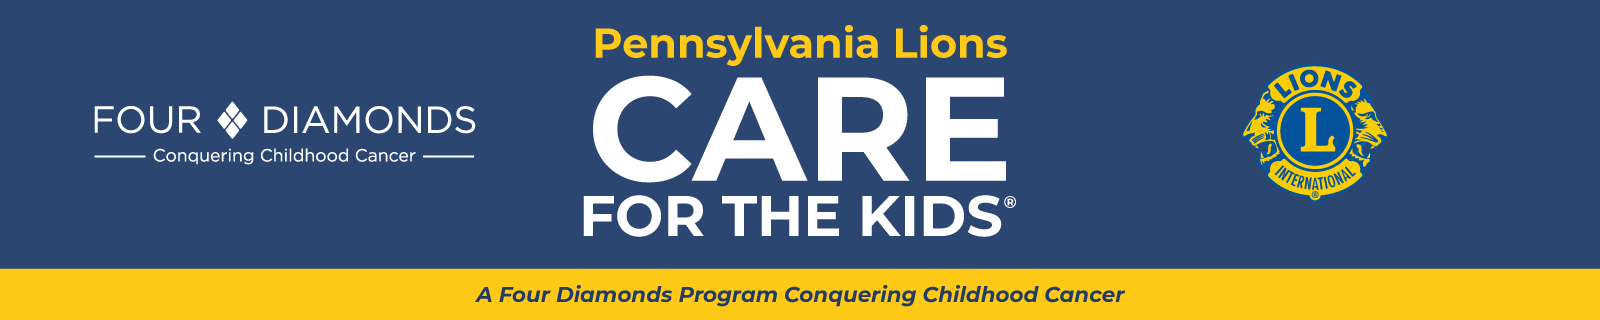 Pennsylvania Lions Care For The Kids